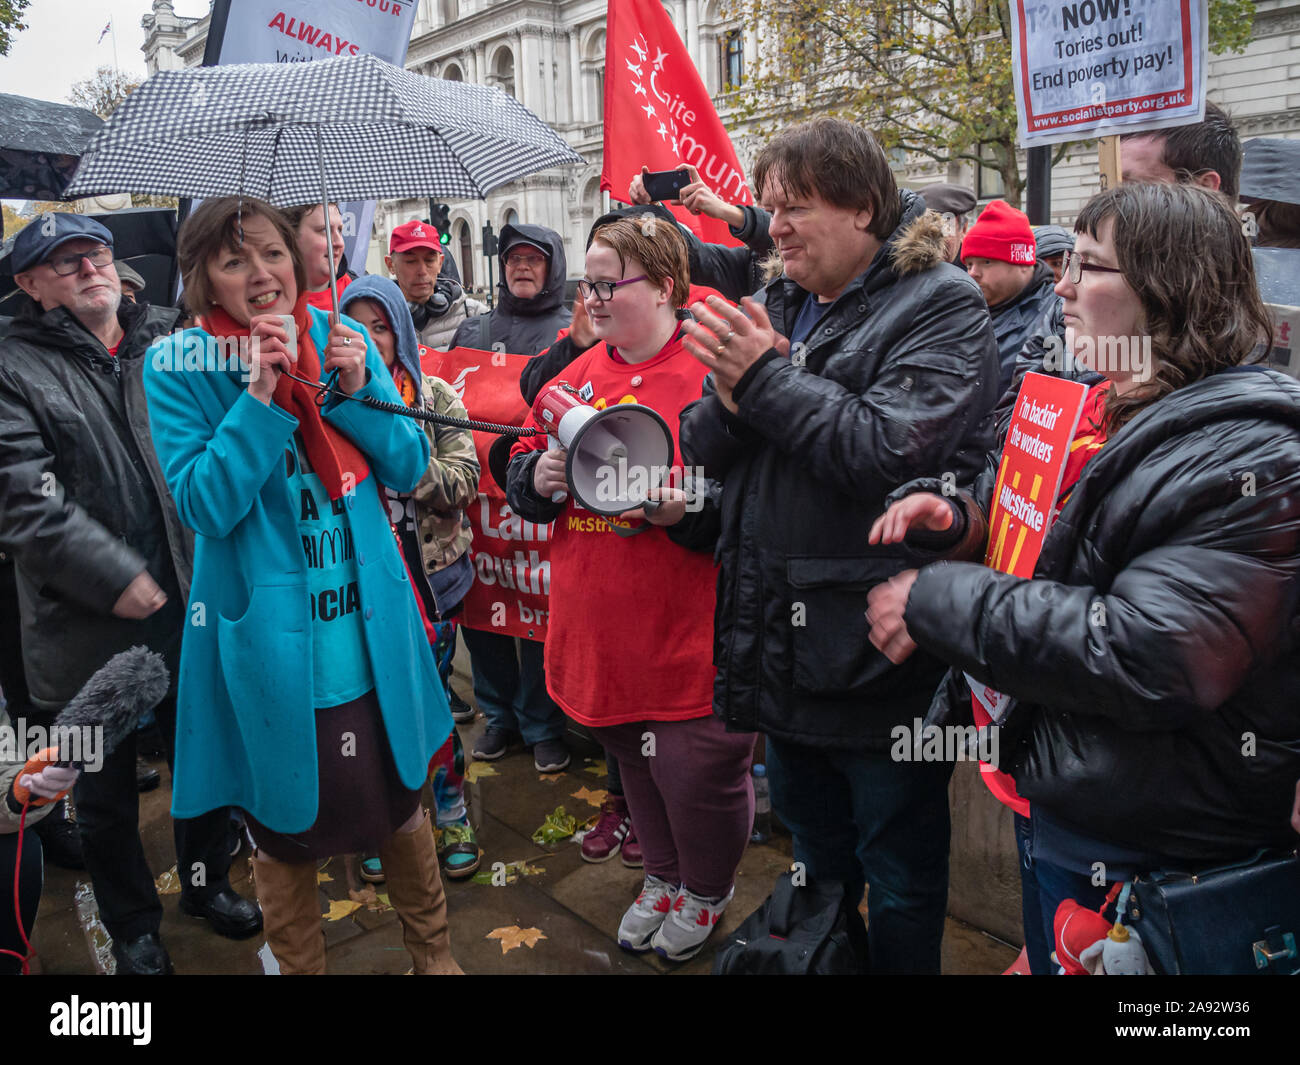 London, UK. 12th November 2019. Frances O’Grady, General Secretary, TUC speaks. A rally by strikers from 6 South London McDonald’s stores and supporters at Downing St demanded £15 an hour, an end to youth rates, guaranteed hours of up to 40 hours a week, notice of shifts 4 weeks in advance, recognition of the Bakers Food and Allied Workers’ Union, and to be treated with respect and dignity at work. Speakers included BFAWU's Ian Hodson, TUC's Frances O'Grady, Jo Grady of UCU, John McDonnell and a leader of the US Fight for 15 campaign. Peter Marshall/Alamy Live News Stock Photo